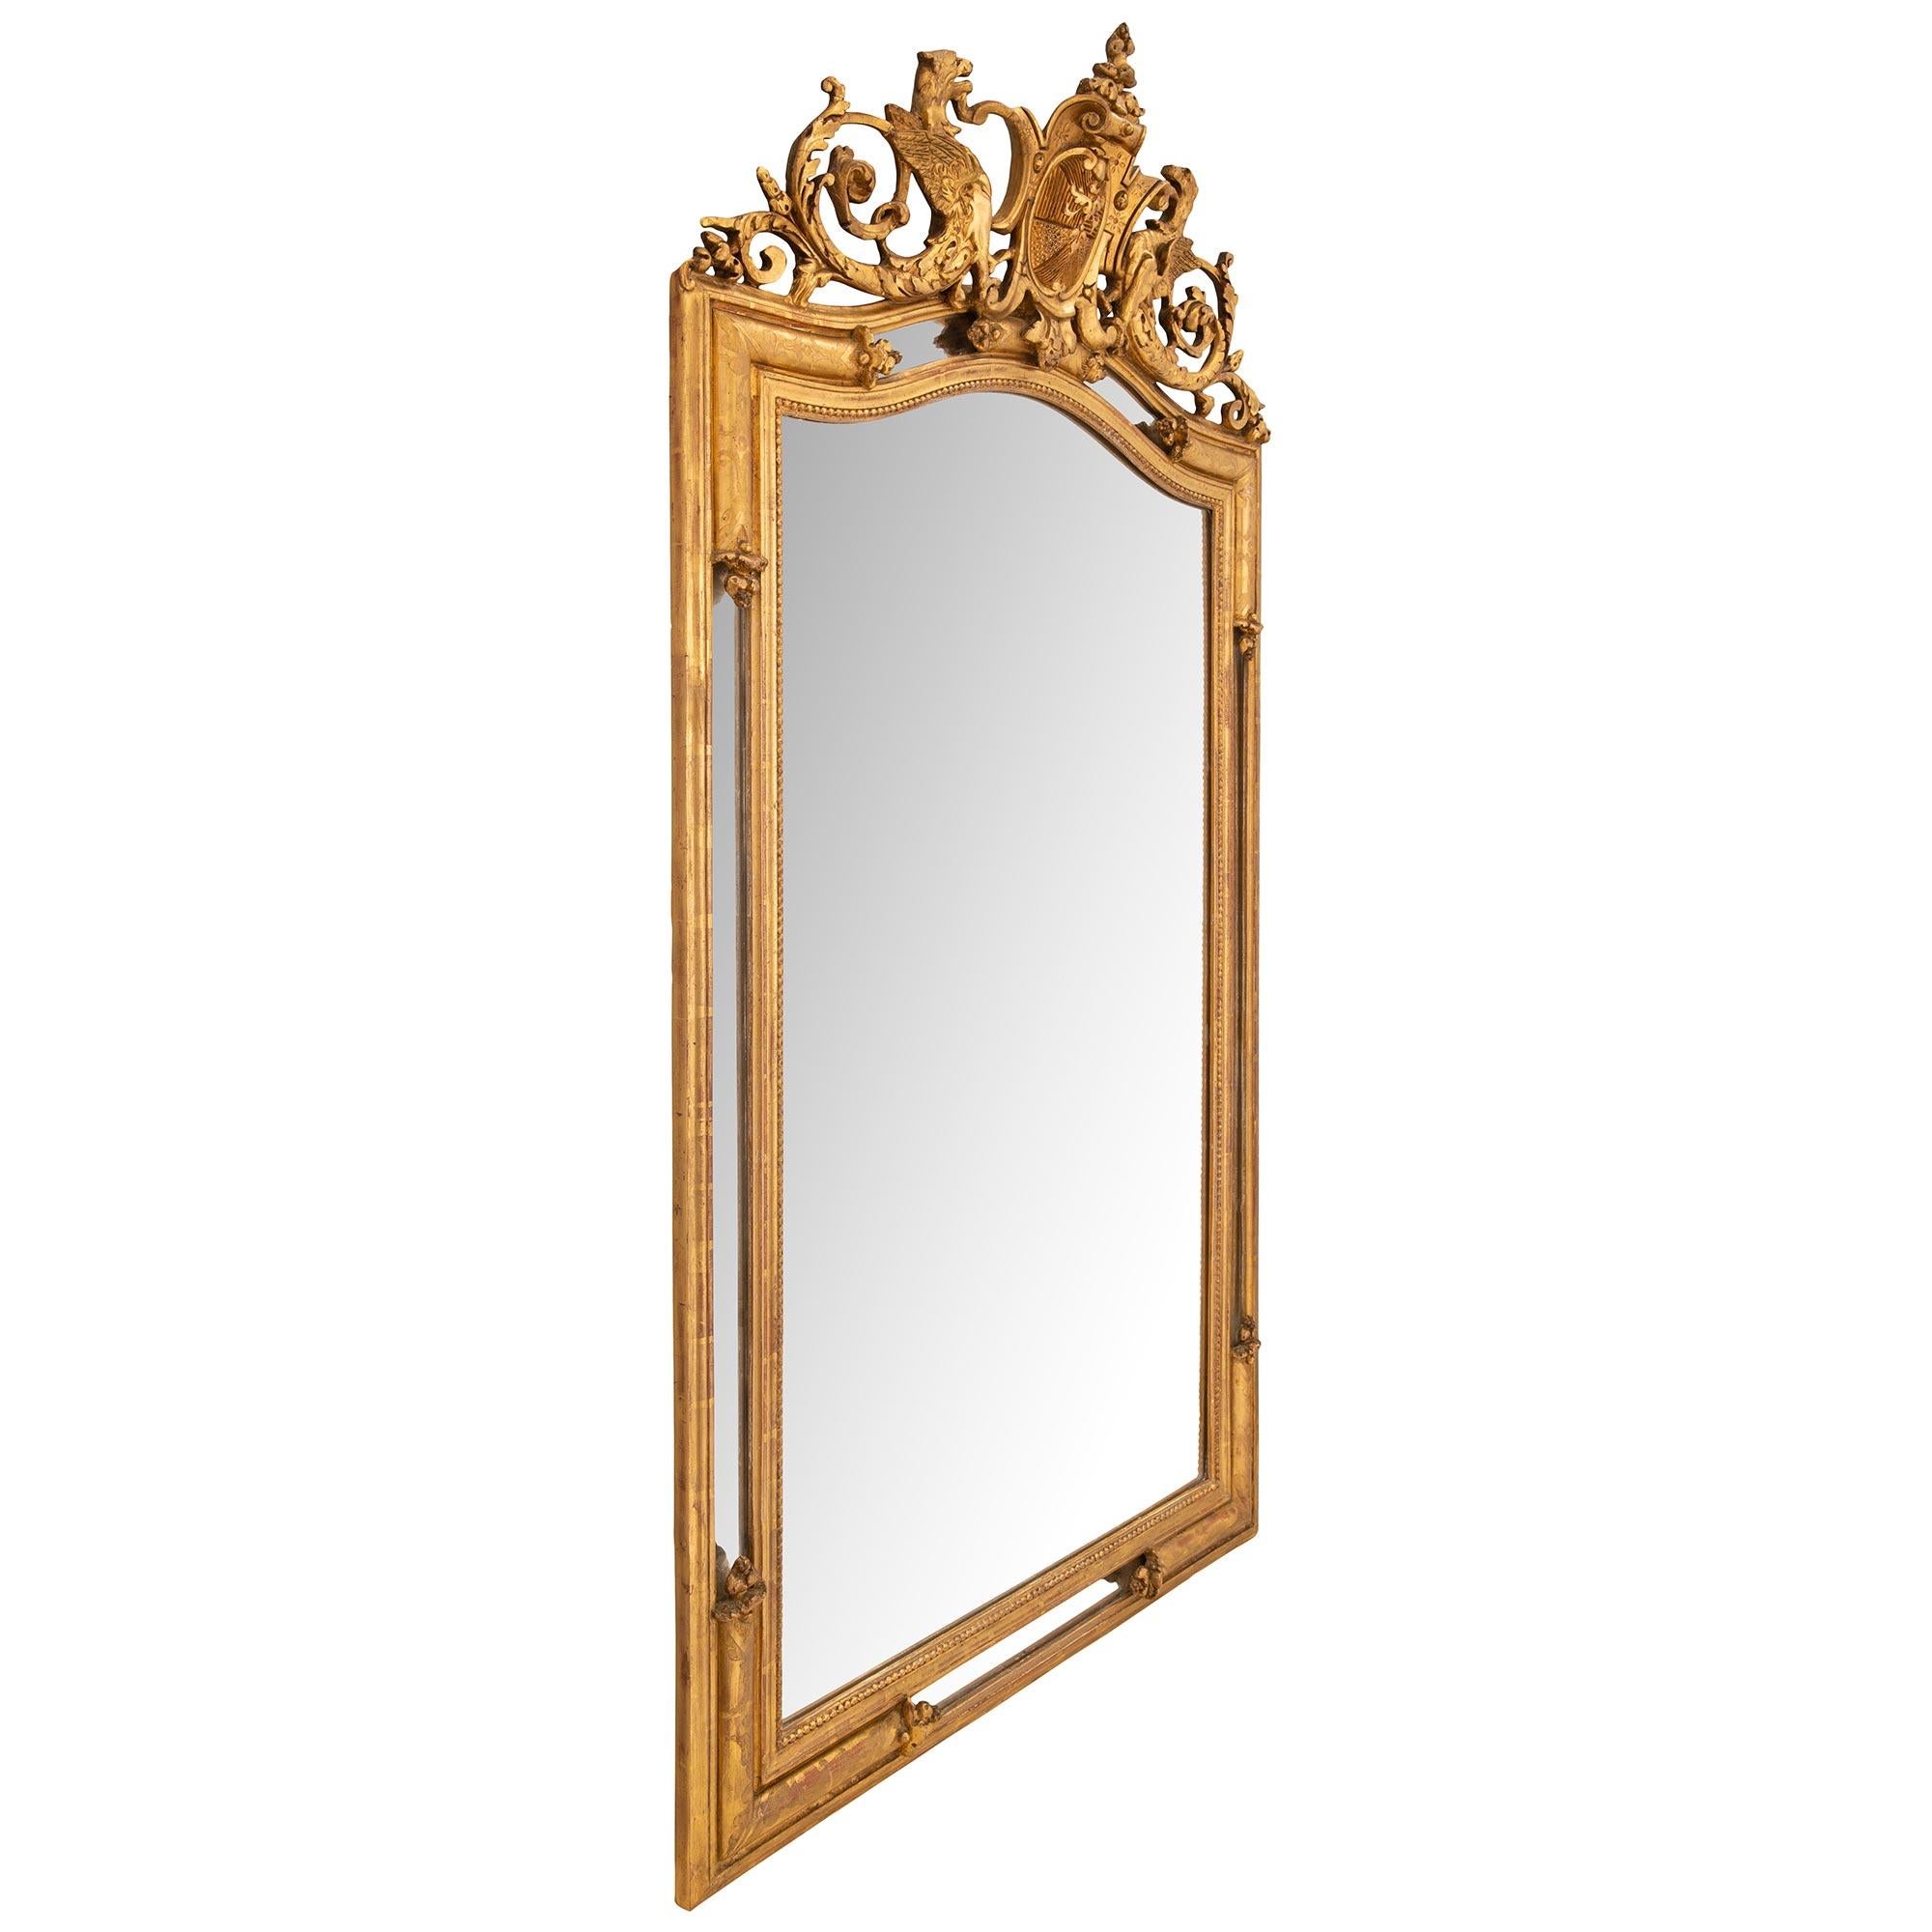 An attractive French late 19th century Renaissance St. double frame giltwood mirror. The rectangular mirror, between its outside moulded border and beaded interior border, is decorated with moulded giltwood etched reserves with carved foliate